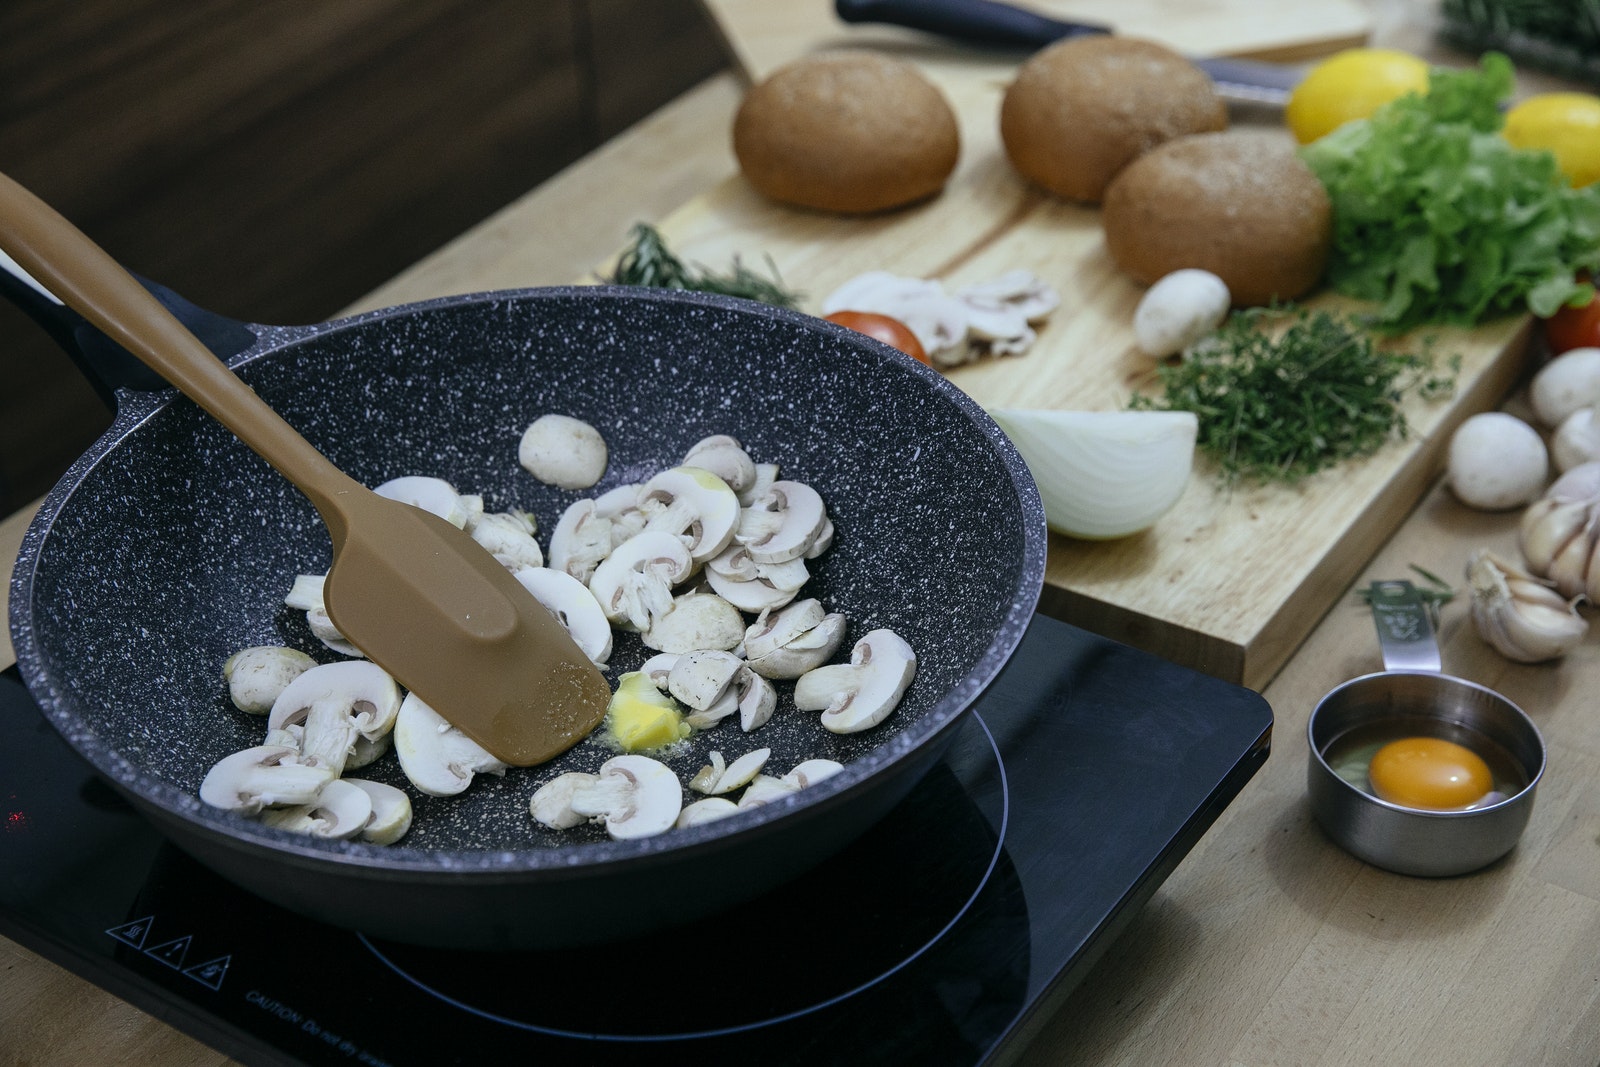 Chopped mushrooms in frying pan placed on stove near various veggies and herbs